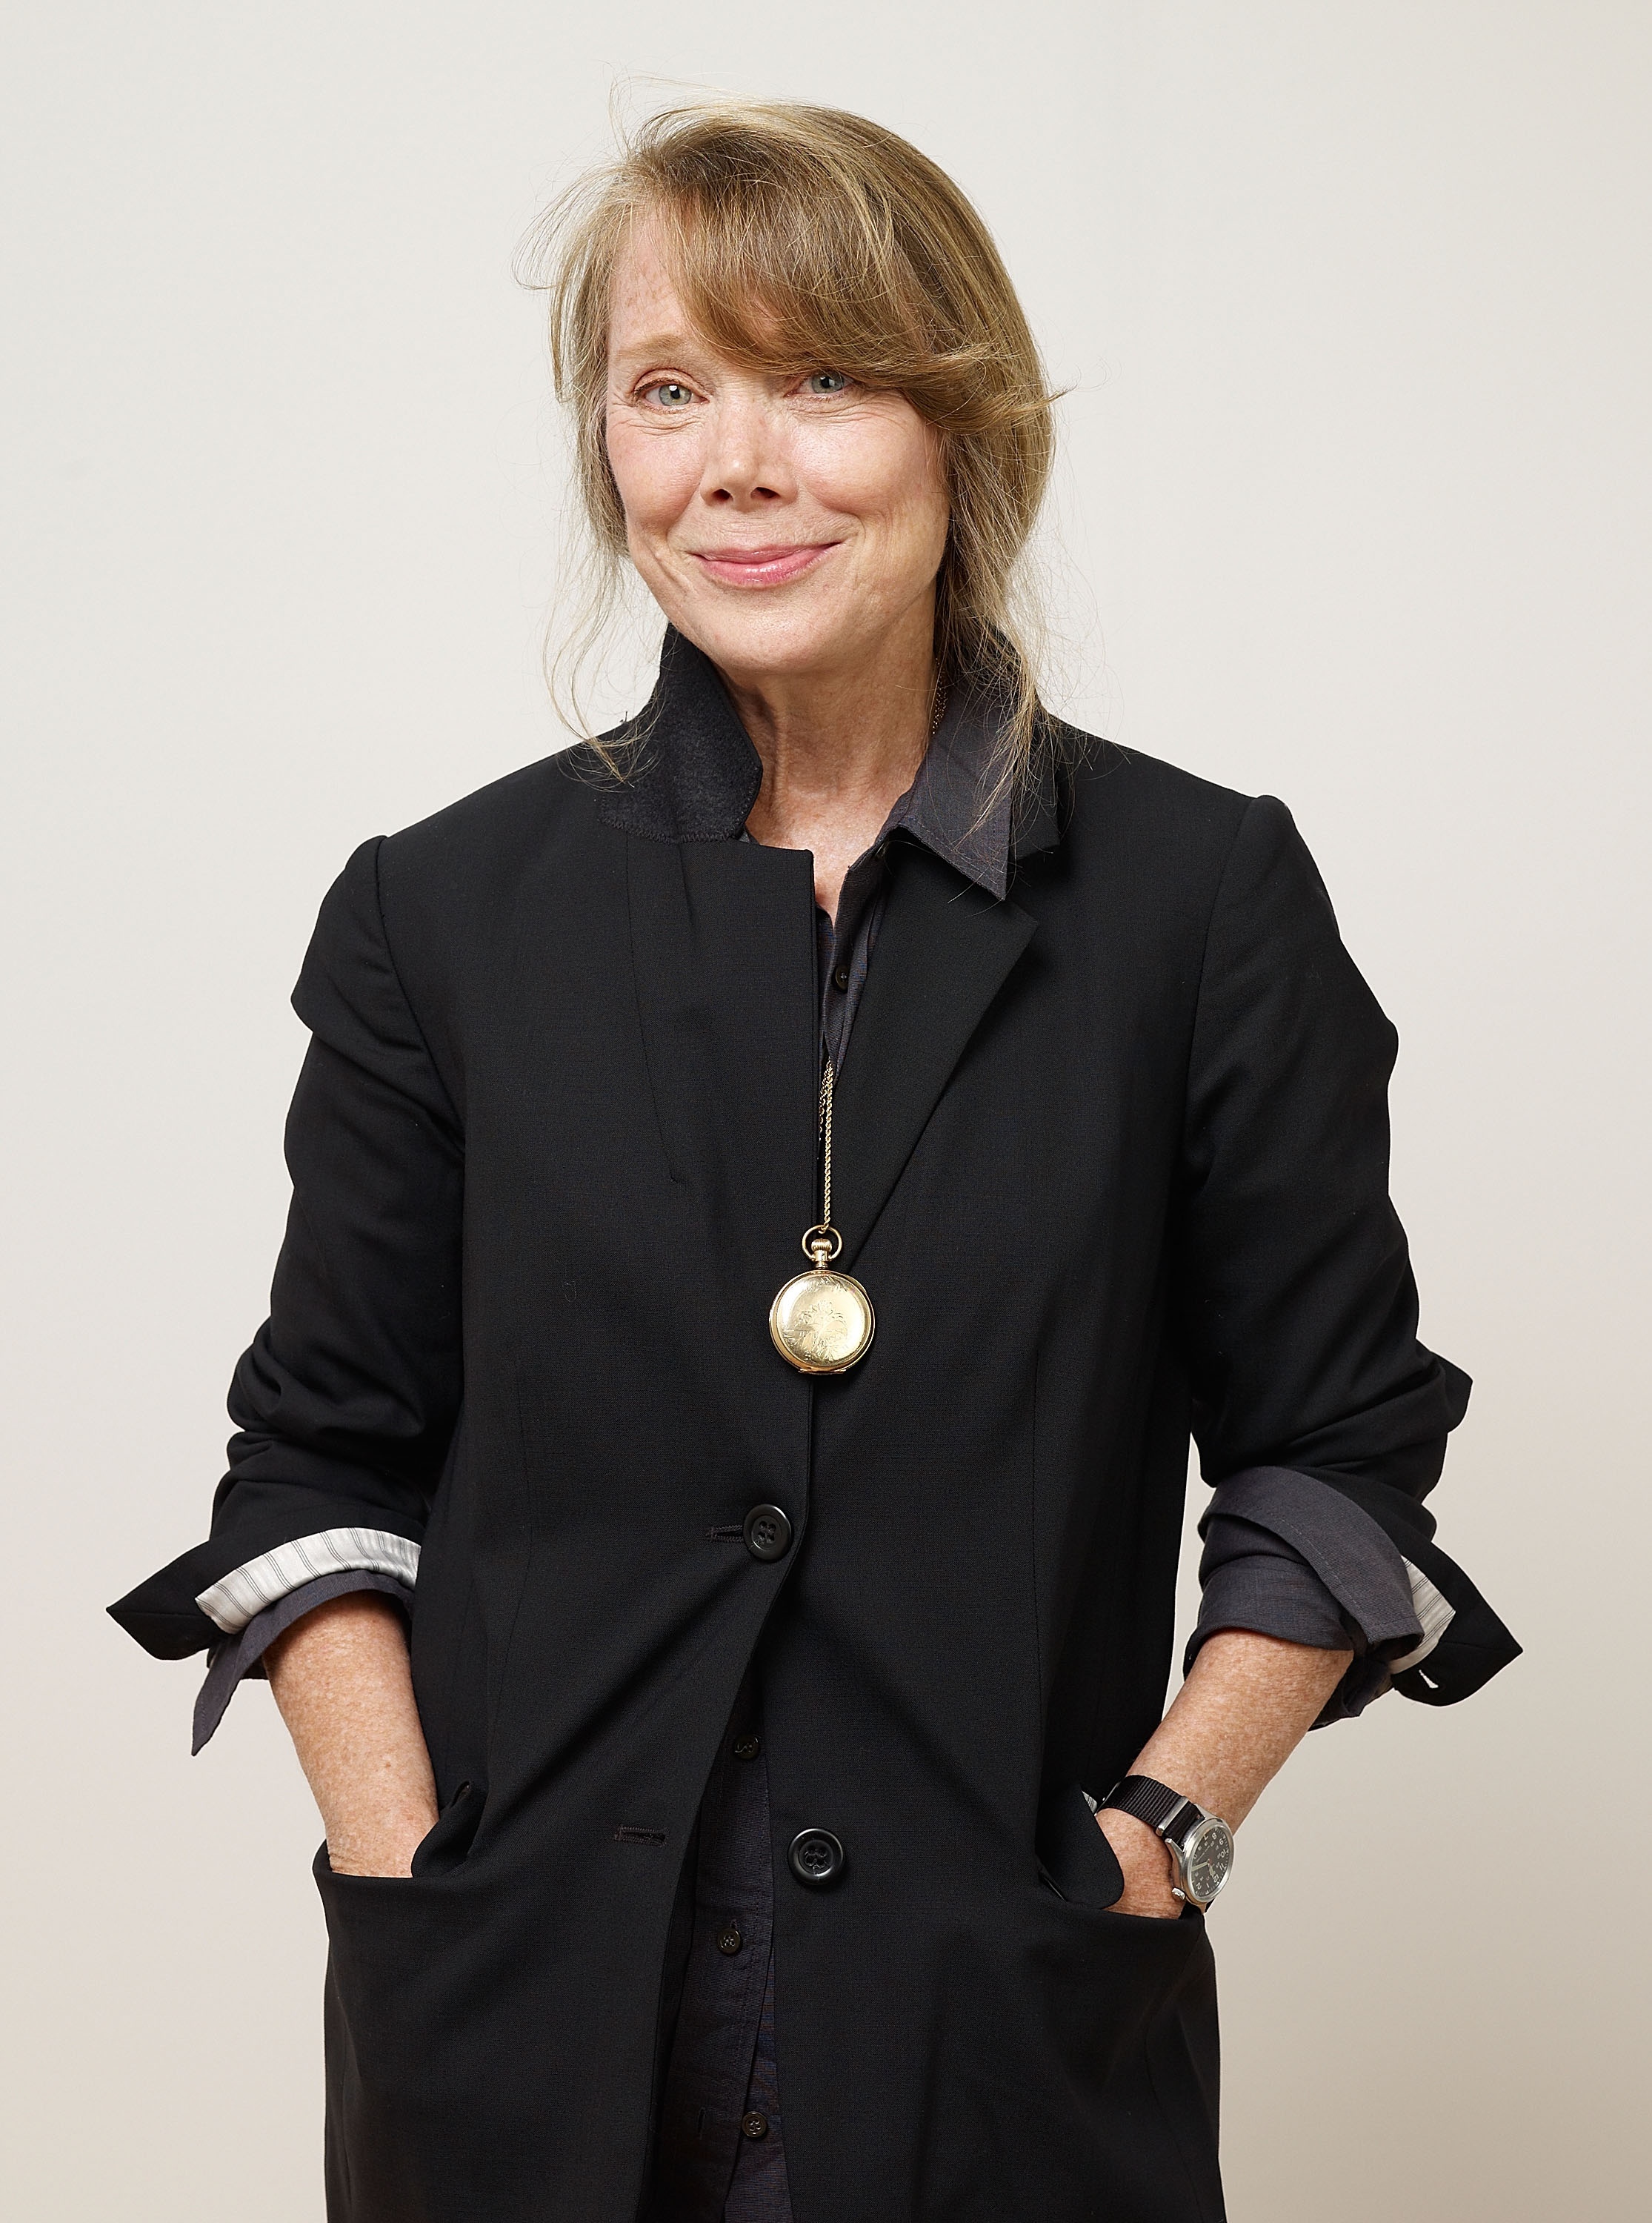 Actress Sissy Spacek poses for a portrait during the 2009 Toronto International Film Festival at The Sutton Place Hotel on September 13, 2009 in Toronto, Canada | Source: Getty Images